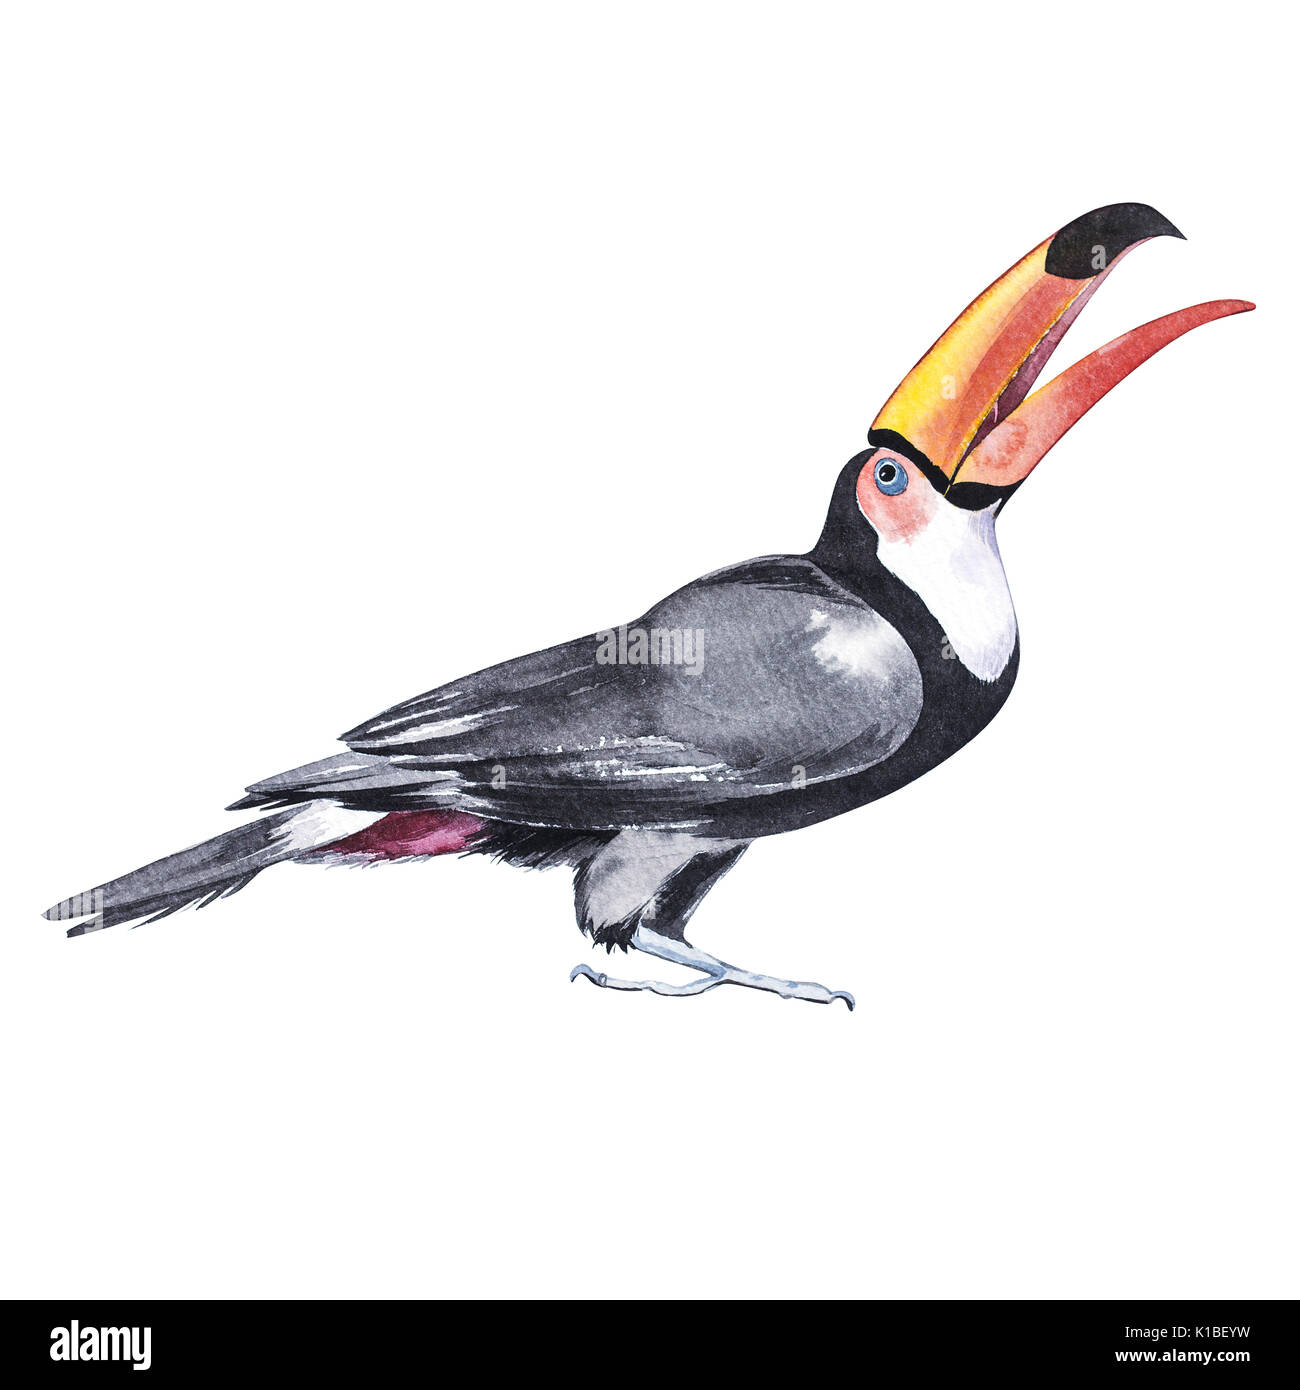 Black Toucan watercolor illustration isolated on white background. Stock Photo